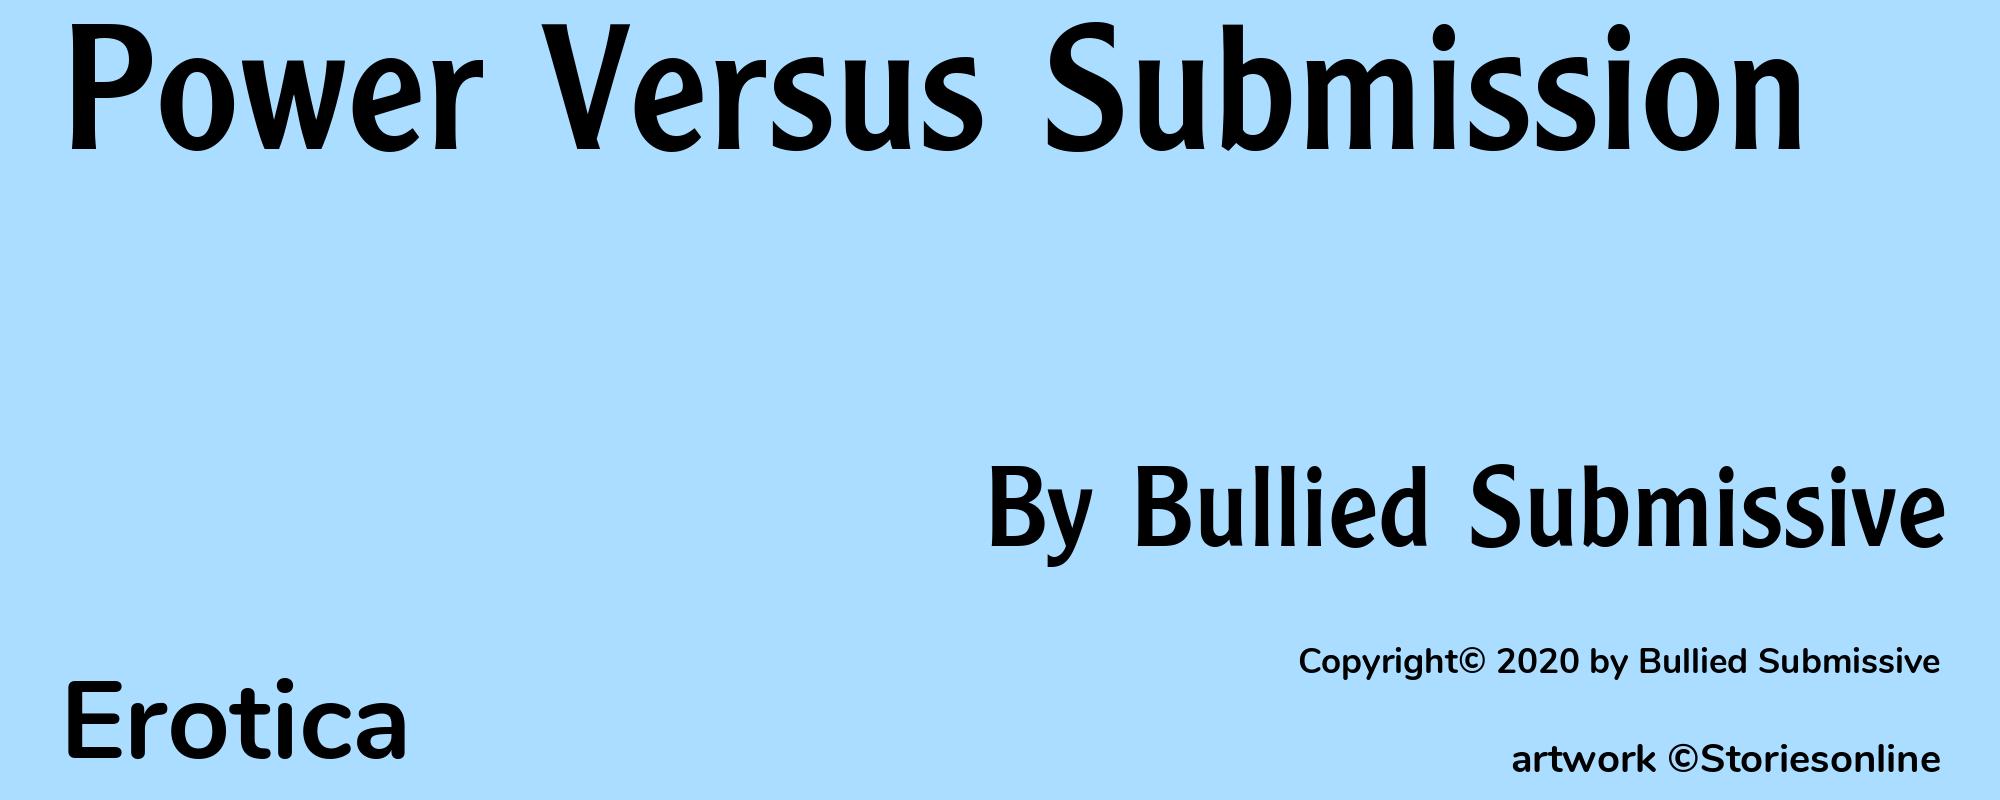 Power Versus Submission - Cover